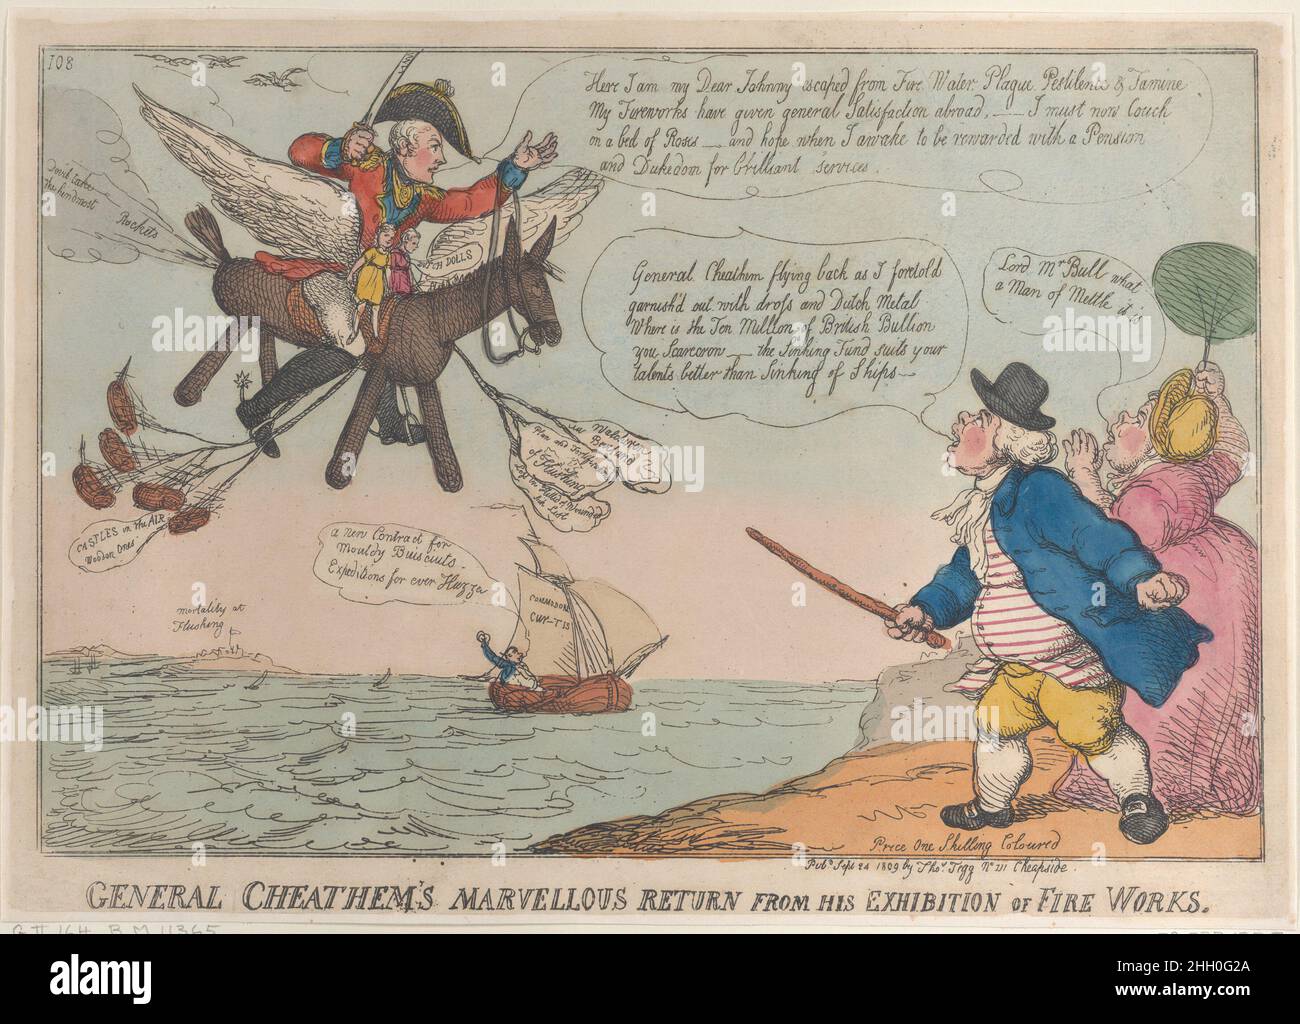 General Cheathem's Marvellous Return from His Exhibition of Fire Works September 24, 1809 Thomas Rowlandson At left, Lord Chatham, with his sword drawn, flies across the Channel towards the English coast on a wooden horse with feathered wings. Chatham addresses John Bull and his wife who stand on the shore (right) looking up at him: 'Here I am my Dear Johnny escaped from Fire, Water, Plague, Pestilence & Famine My Fireworks have given general Satisfaction abroad,—I must now Couch on a bed of Roses— and hope when I awake to be rewarded with a Pension and Dukedom for brilliant Services.' John ho Stock Photo